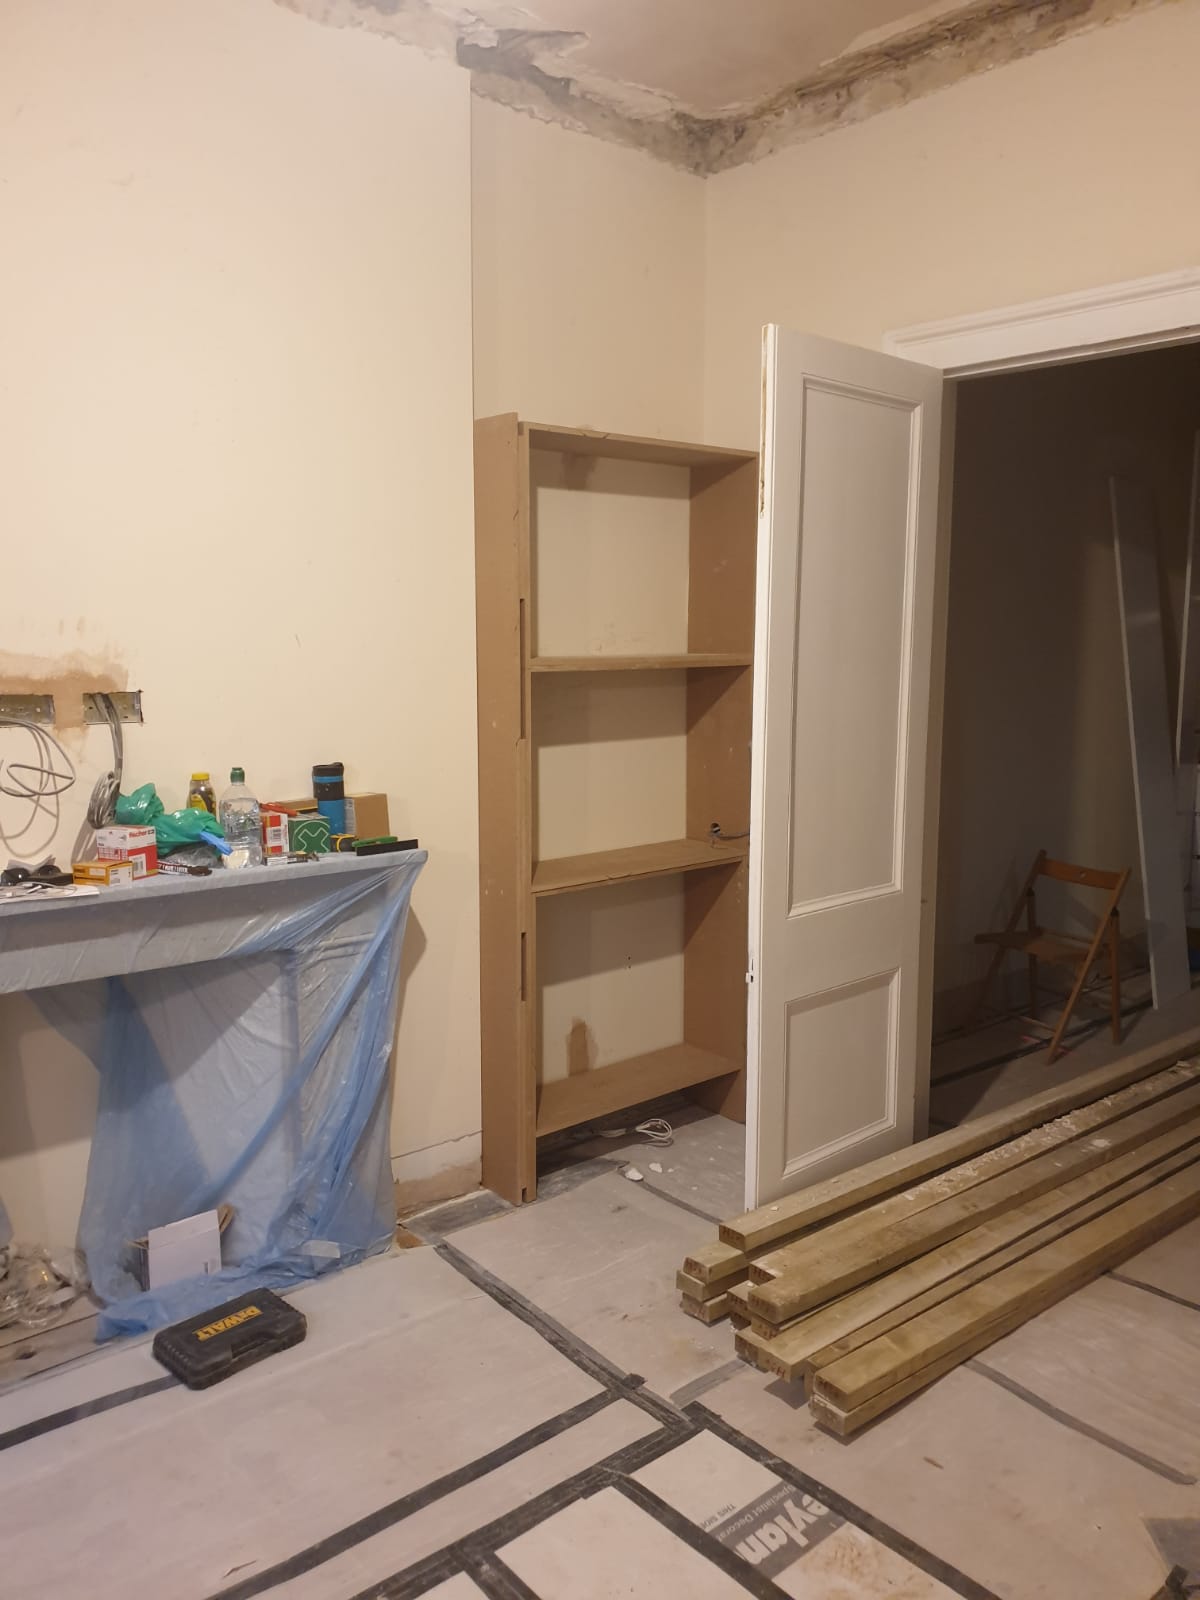 Building Made to Measure Alcove Cabinets